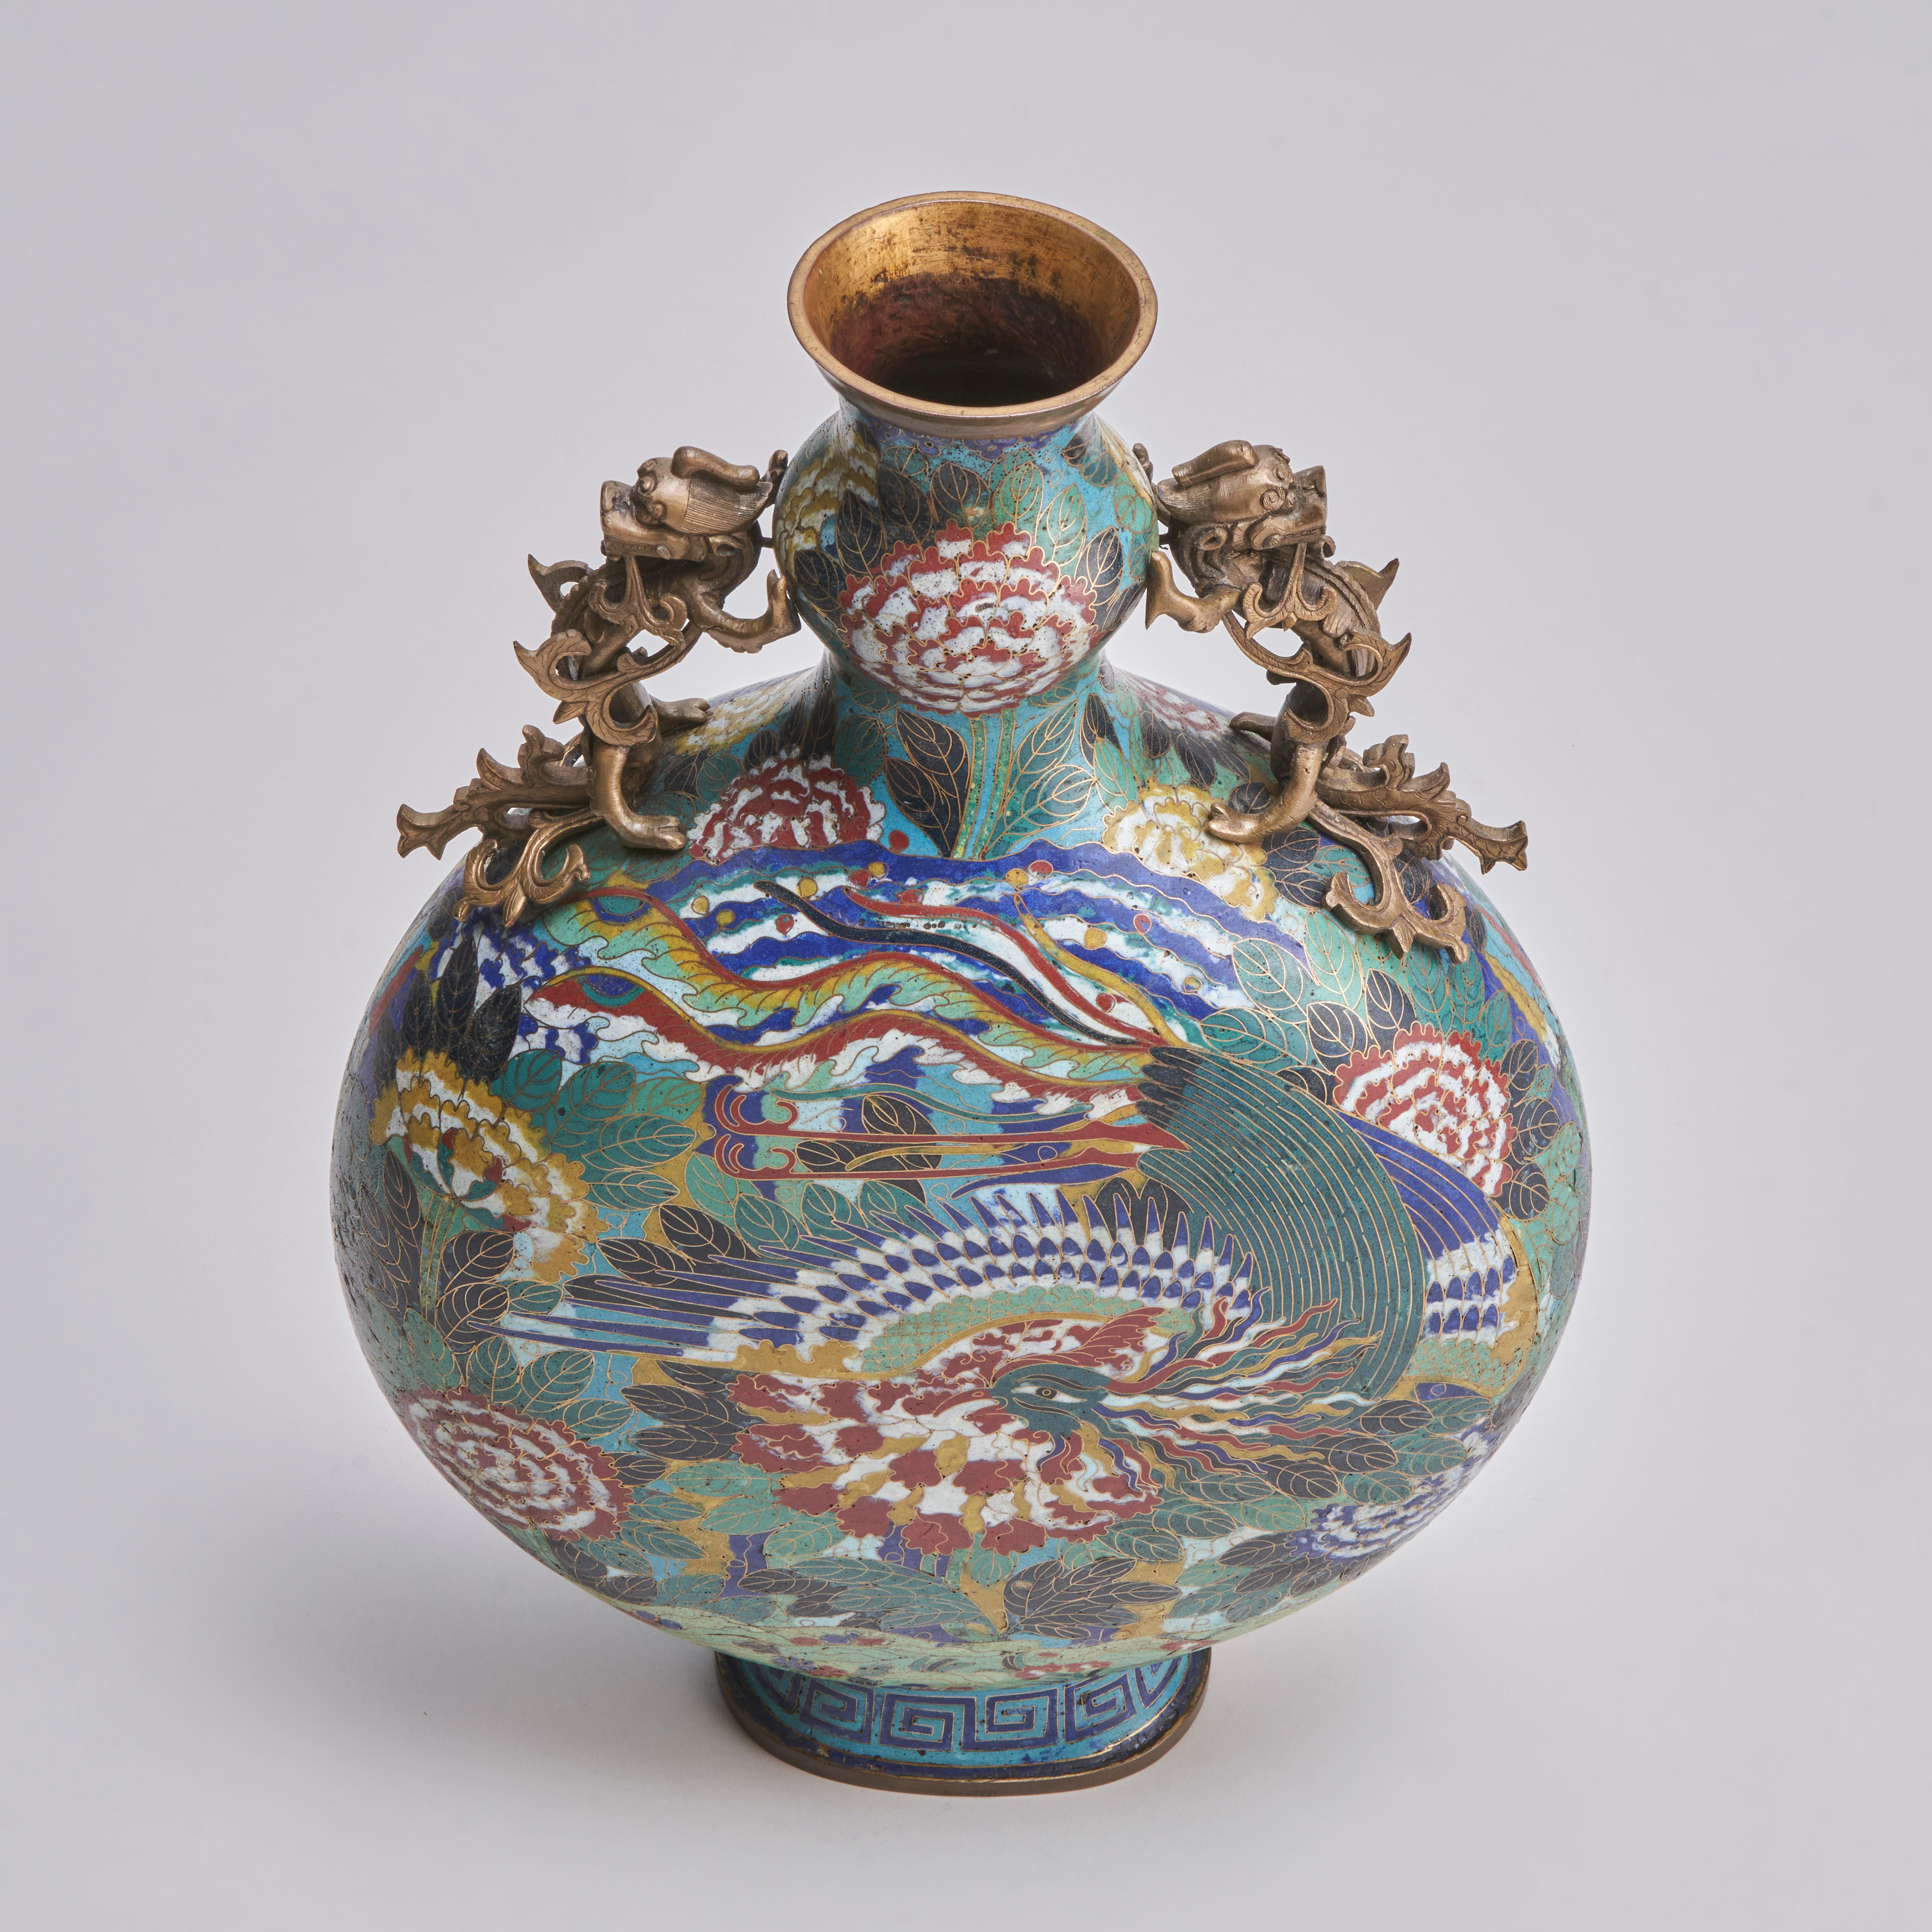 A 19th century Chinese cloisonne moon flask (Baoyueping) with bright polychrome decoration of a phoenix flying among large peonies, twin brass fo dogs flank the top and the foot is decorated with a meandering line.

Contact us for further images or